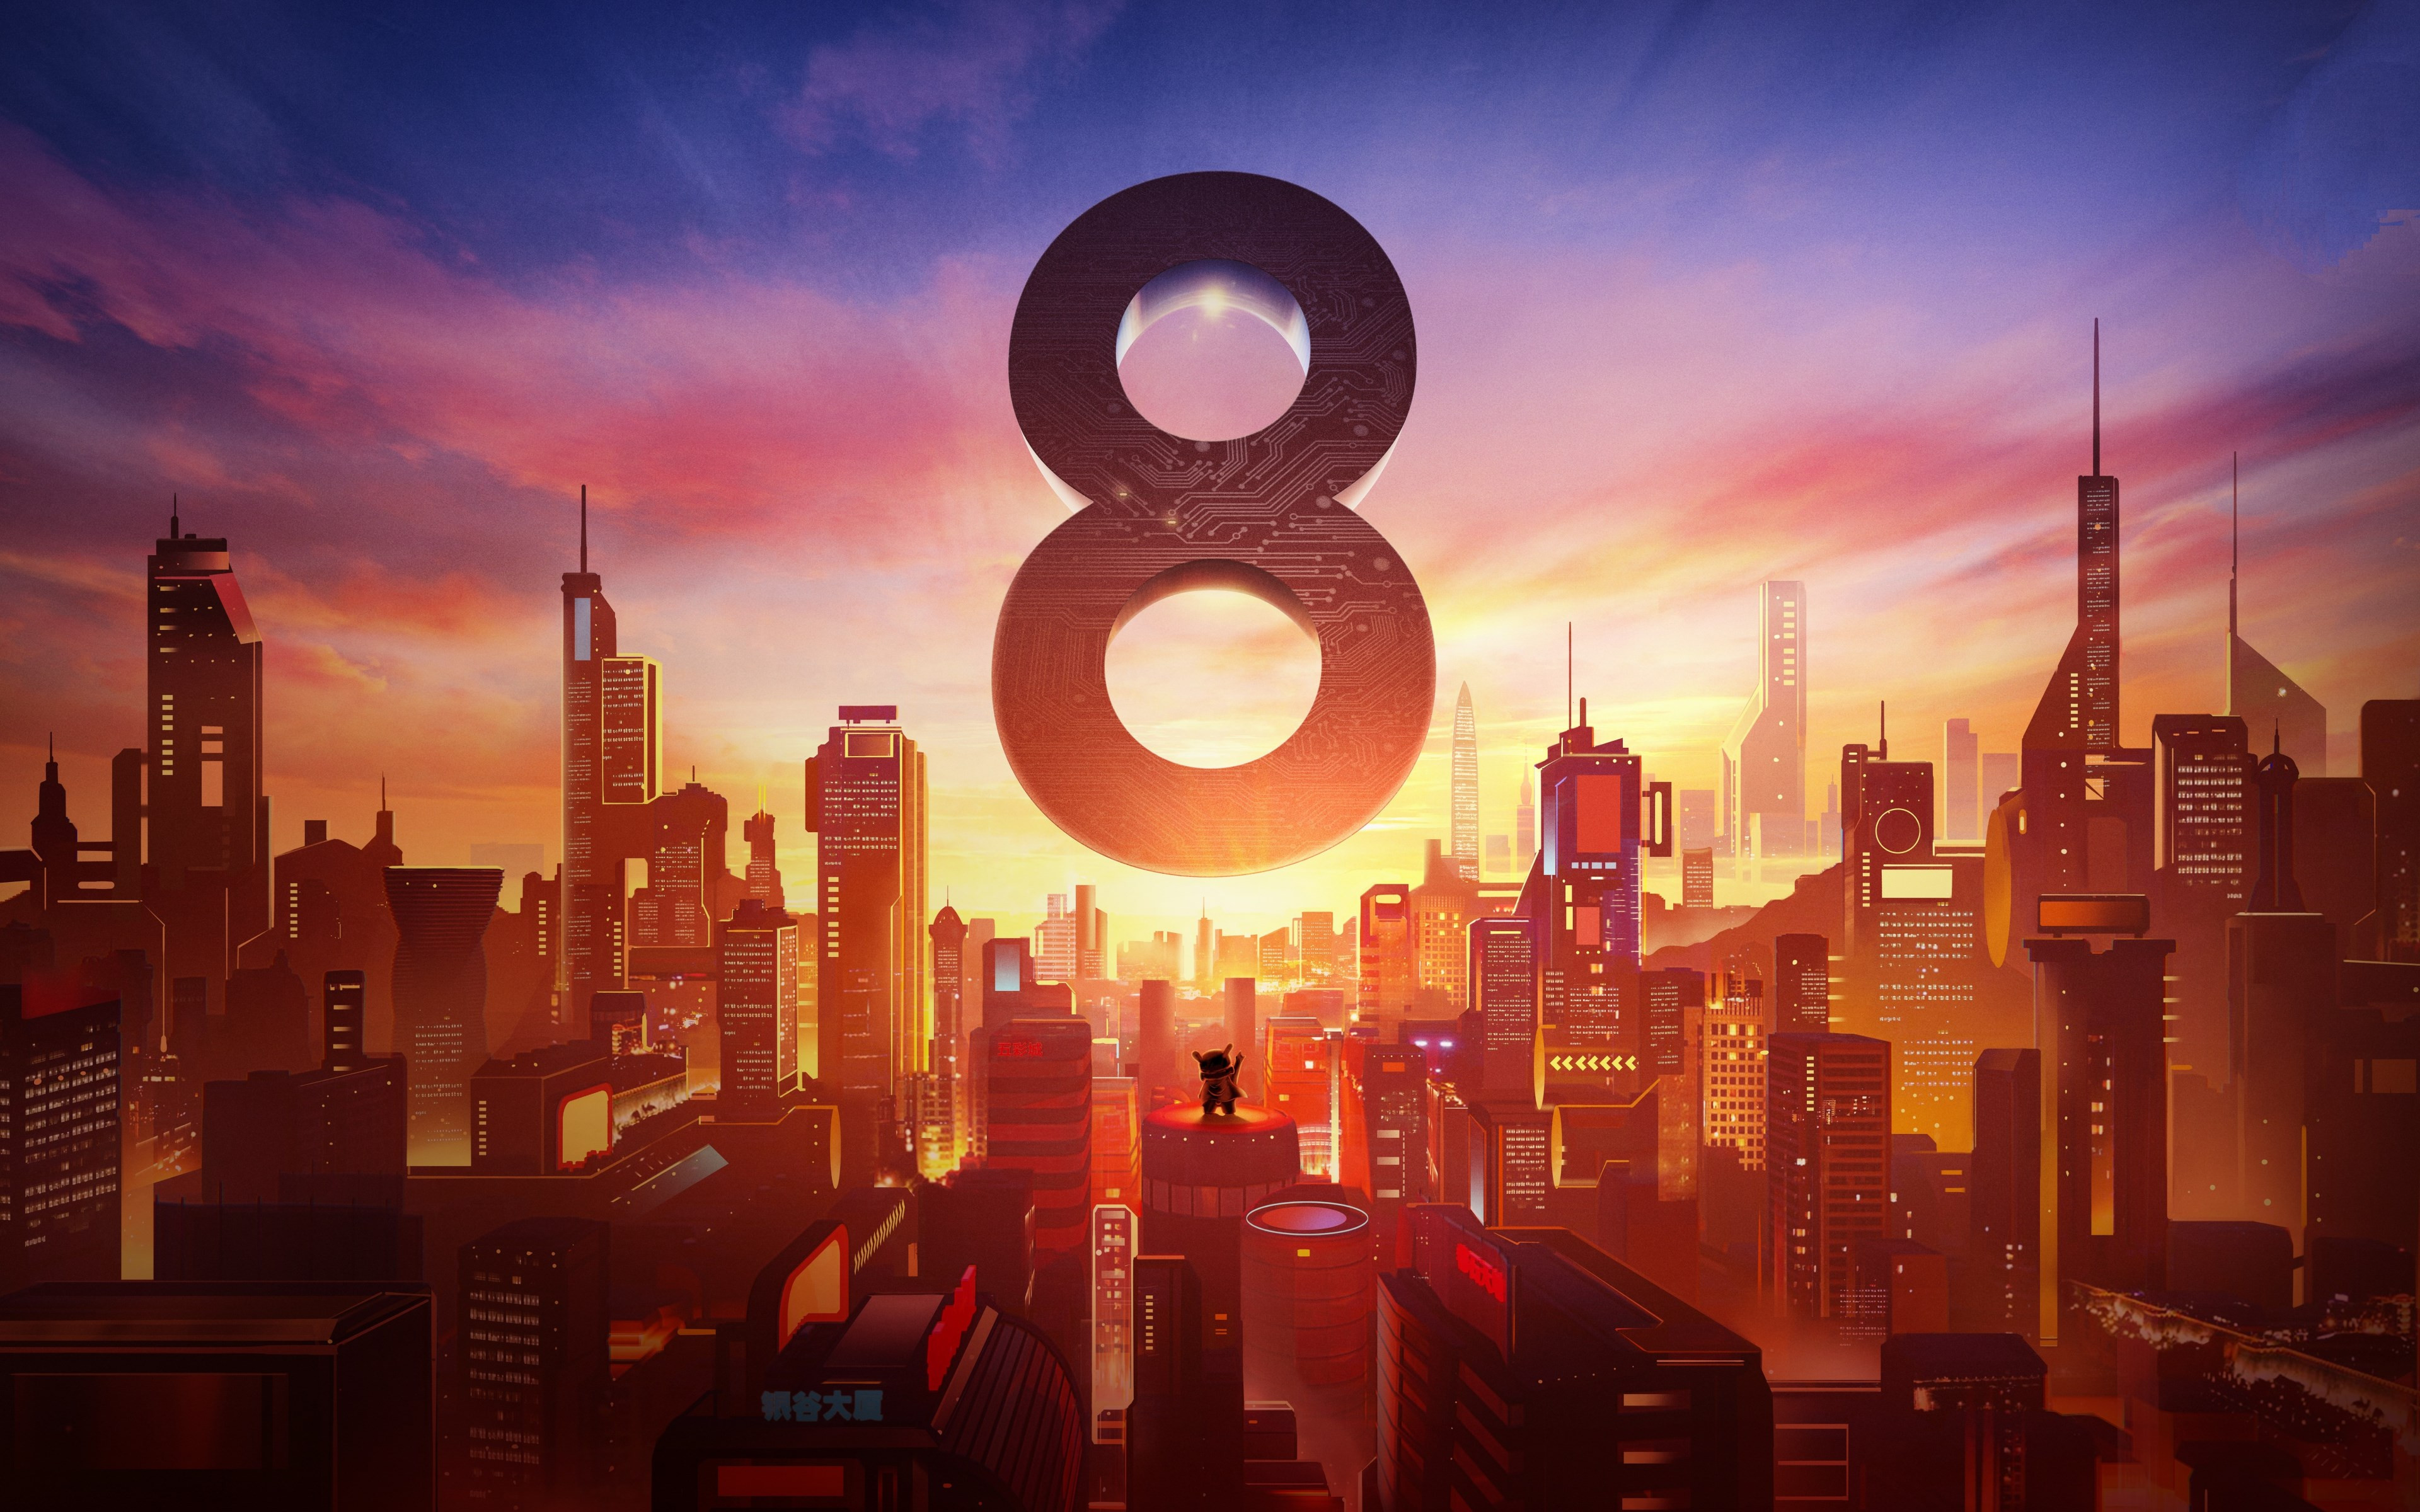 Xiaomi Mi 8. Poster from the launch event wallpaper 3840x2400